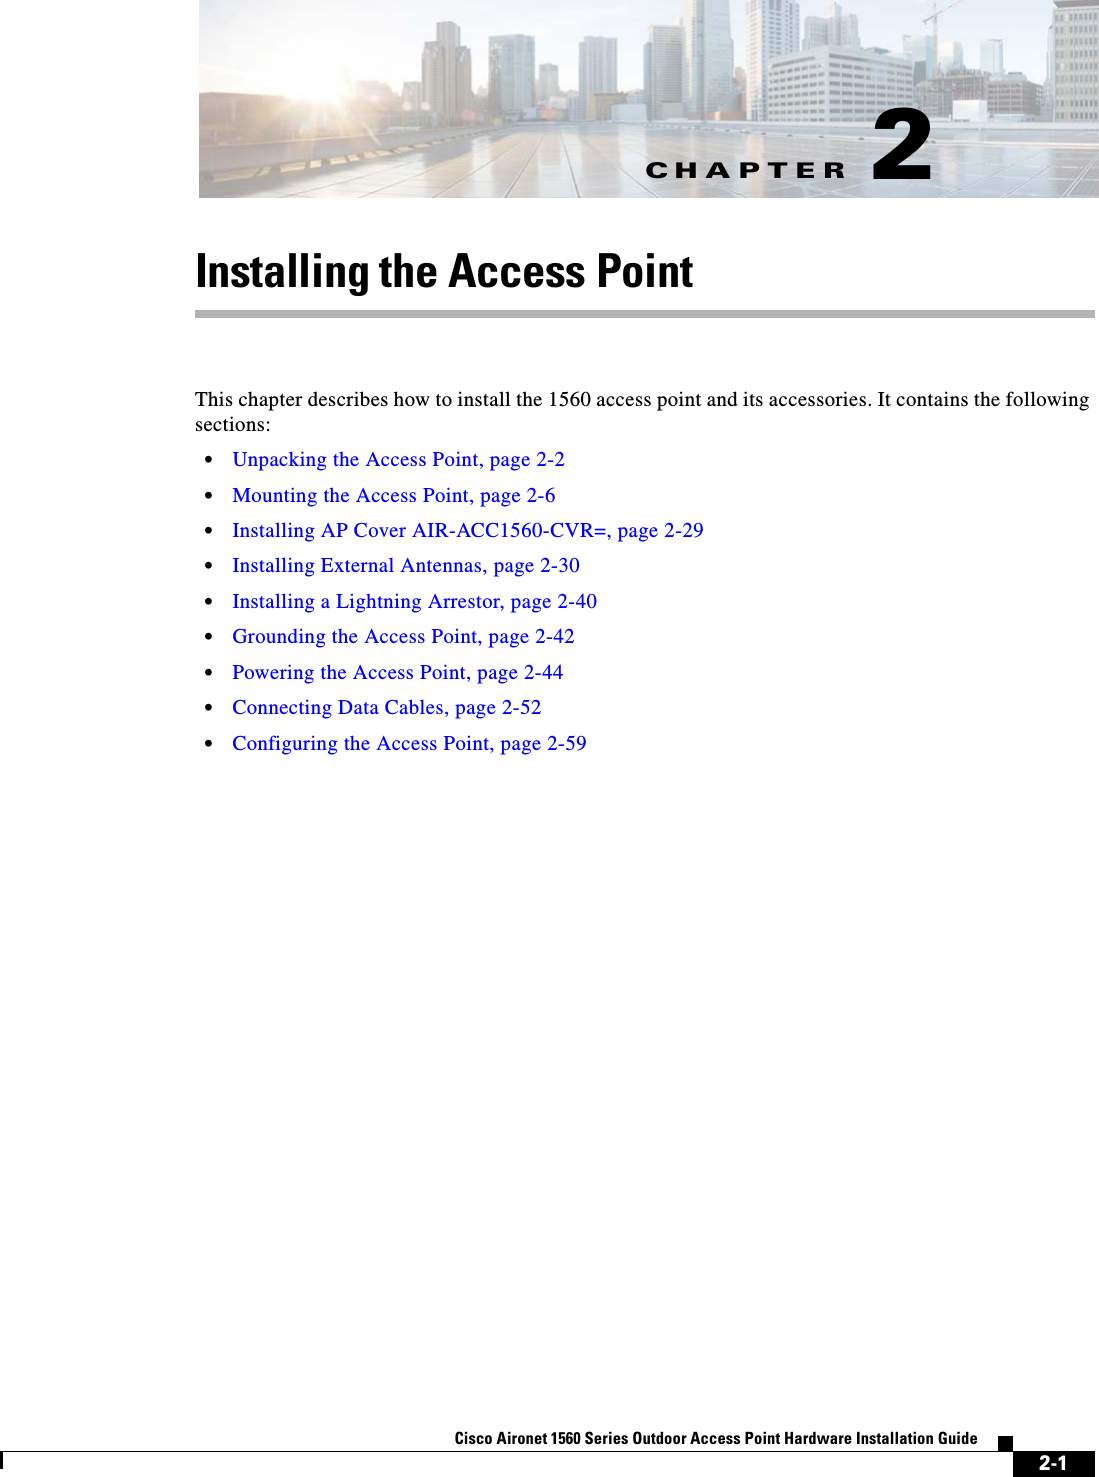 CHAPTER 2-1Cisco Aironet 1560 Series Outdoor Access Point Hardware Installation Guide 2Installing the Access PointThis chapter describes how to install the 1560 access point and its accessories. It contains the following sections:•Unpacking the Access Point, page 2-2•Mounting the Access Point, page 2-6•Installing AP Cover AIR-ACC1560-CVR=, page 2-29•Installing External Antennas, page 2-30•Installing a Lightning Arrestor, page 2-40•Grounding the Access Point, page 2-42•Powering the Access Point, page 2-44•Connecting Data Cables, page 2-52•Configuring the Access Point, page 2-59